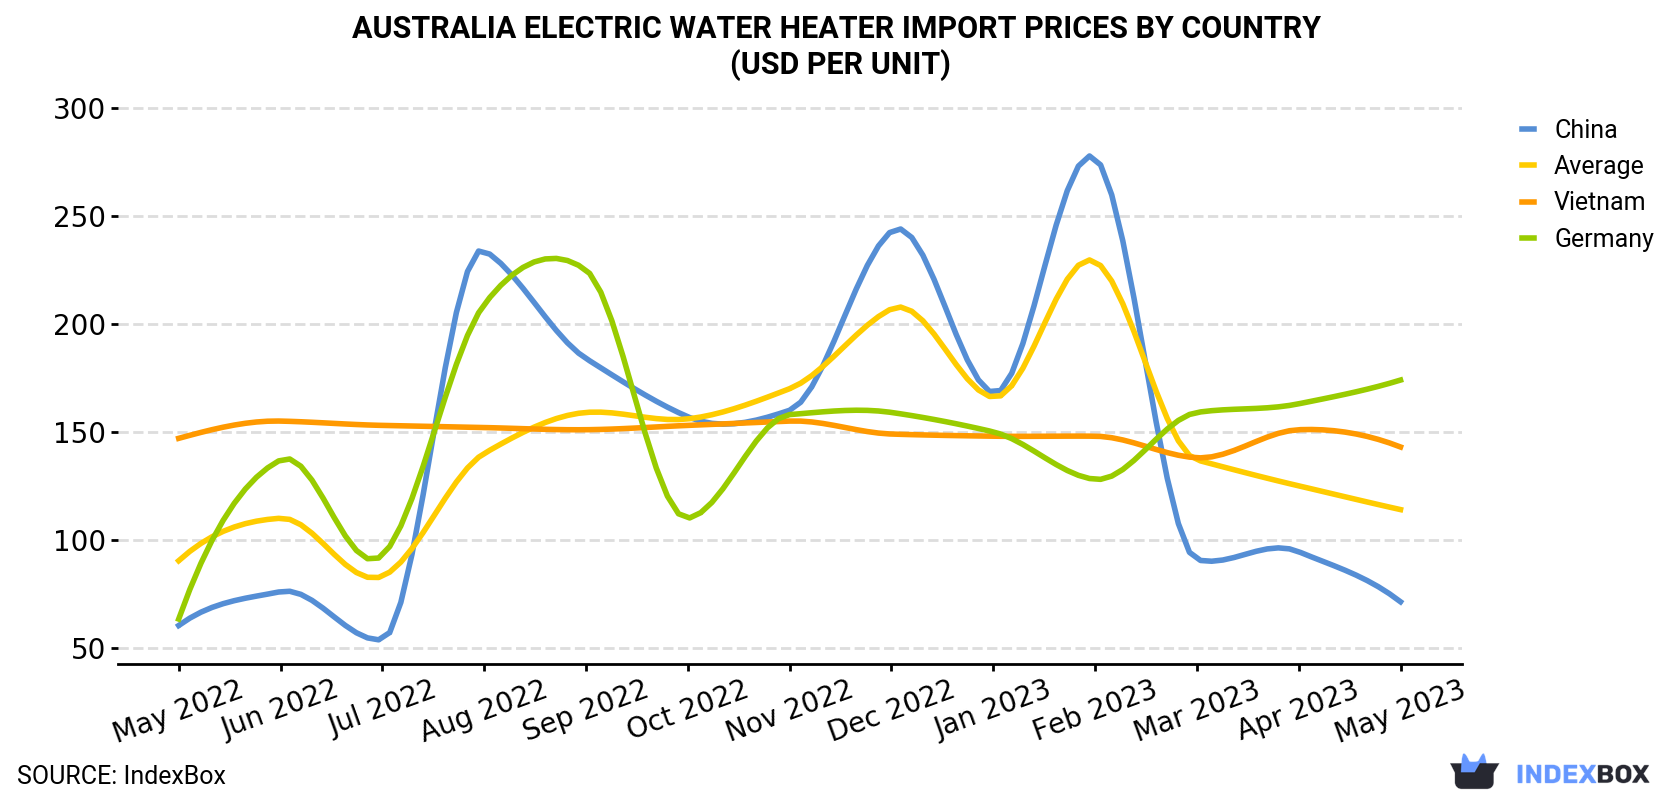 Australia Electric Water Heater Import Prices By Country (USD Per Unit)